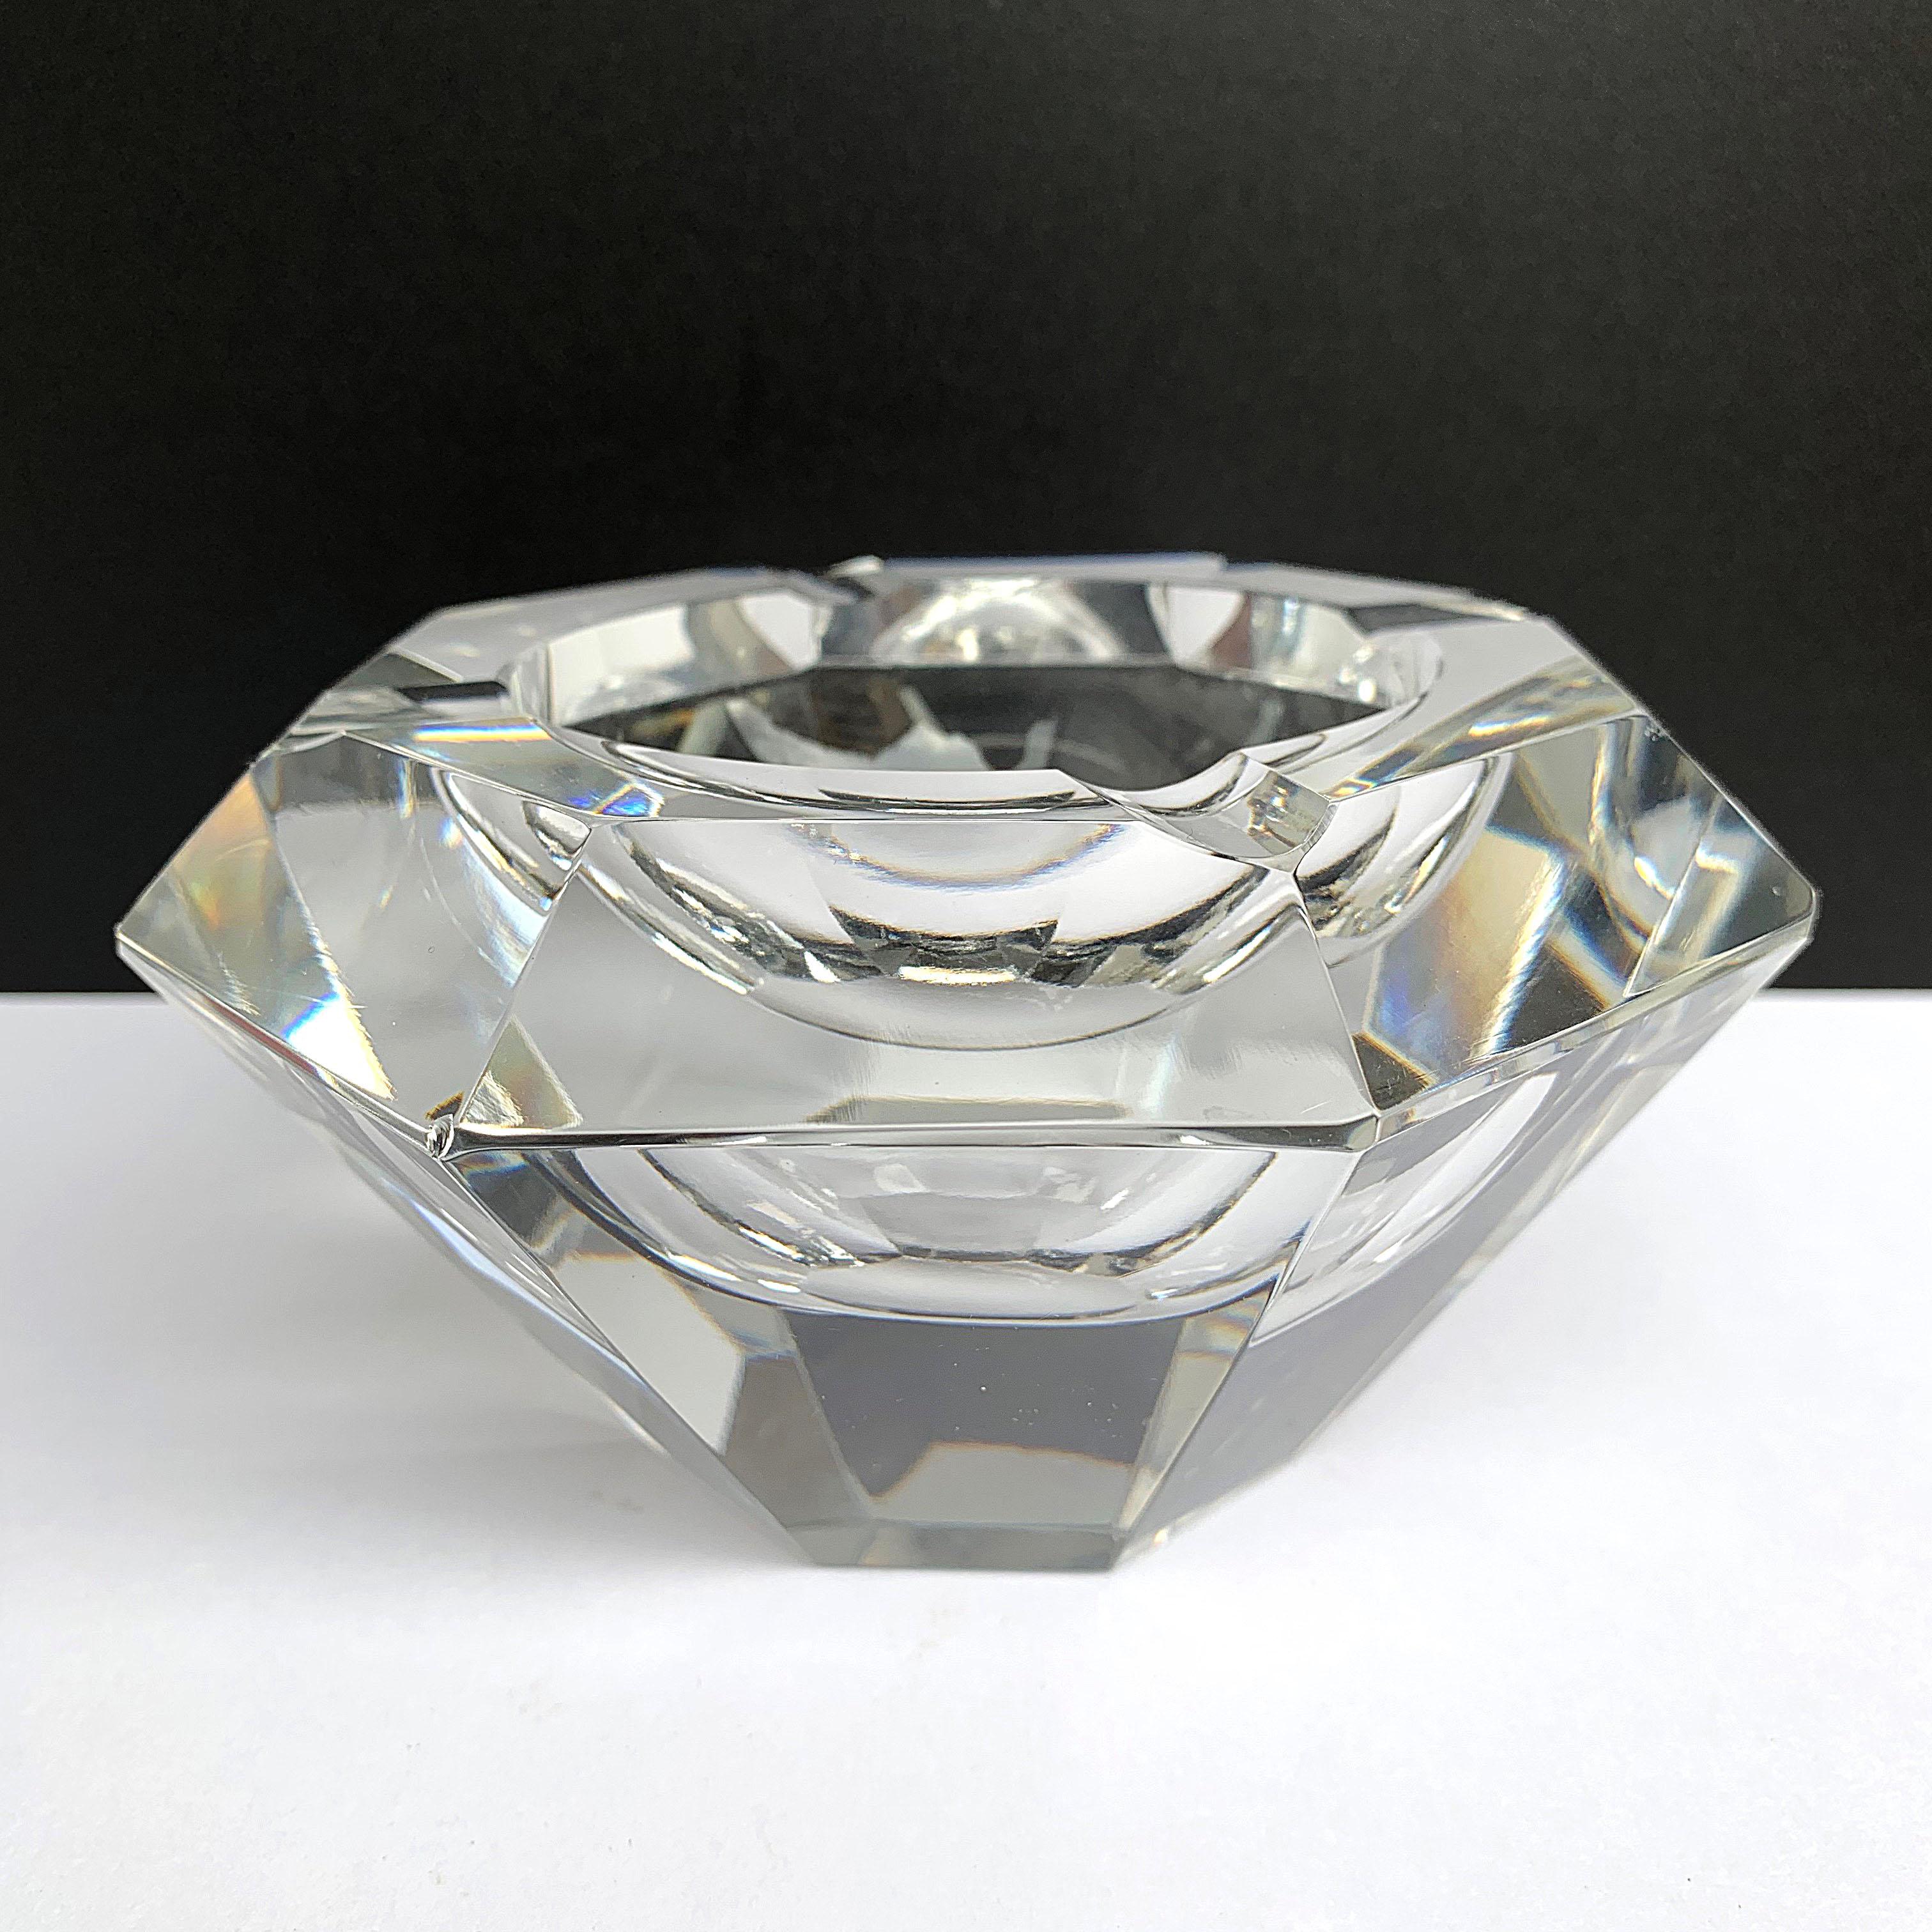 Giant Flavio Poli Bowl in Faceted Murano Glass in the Shape of a Diamond, Italy For Sale 3